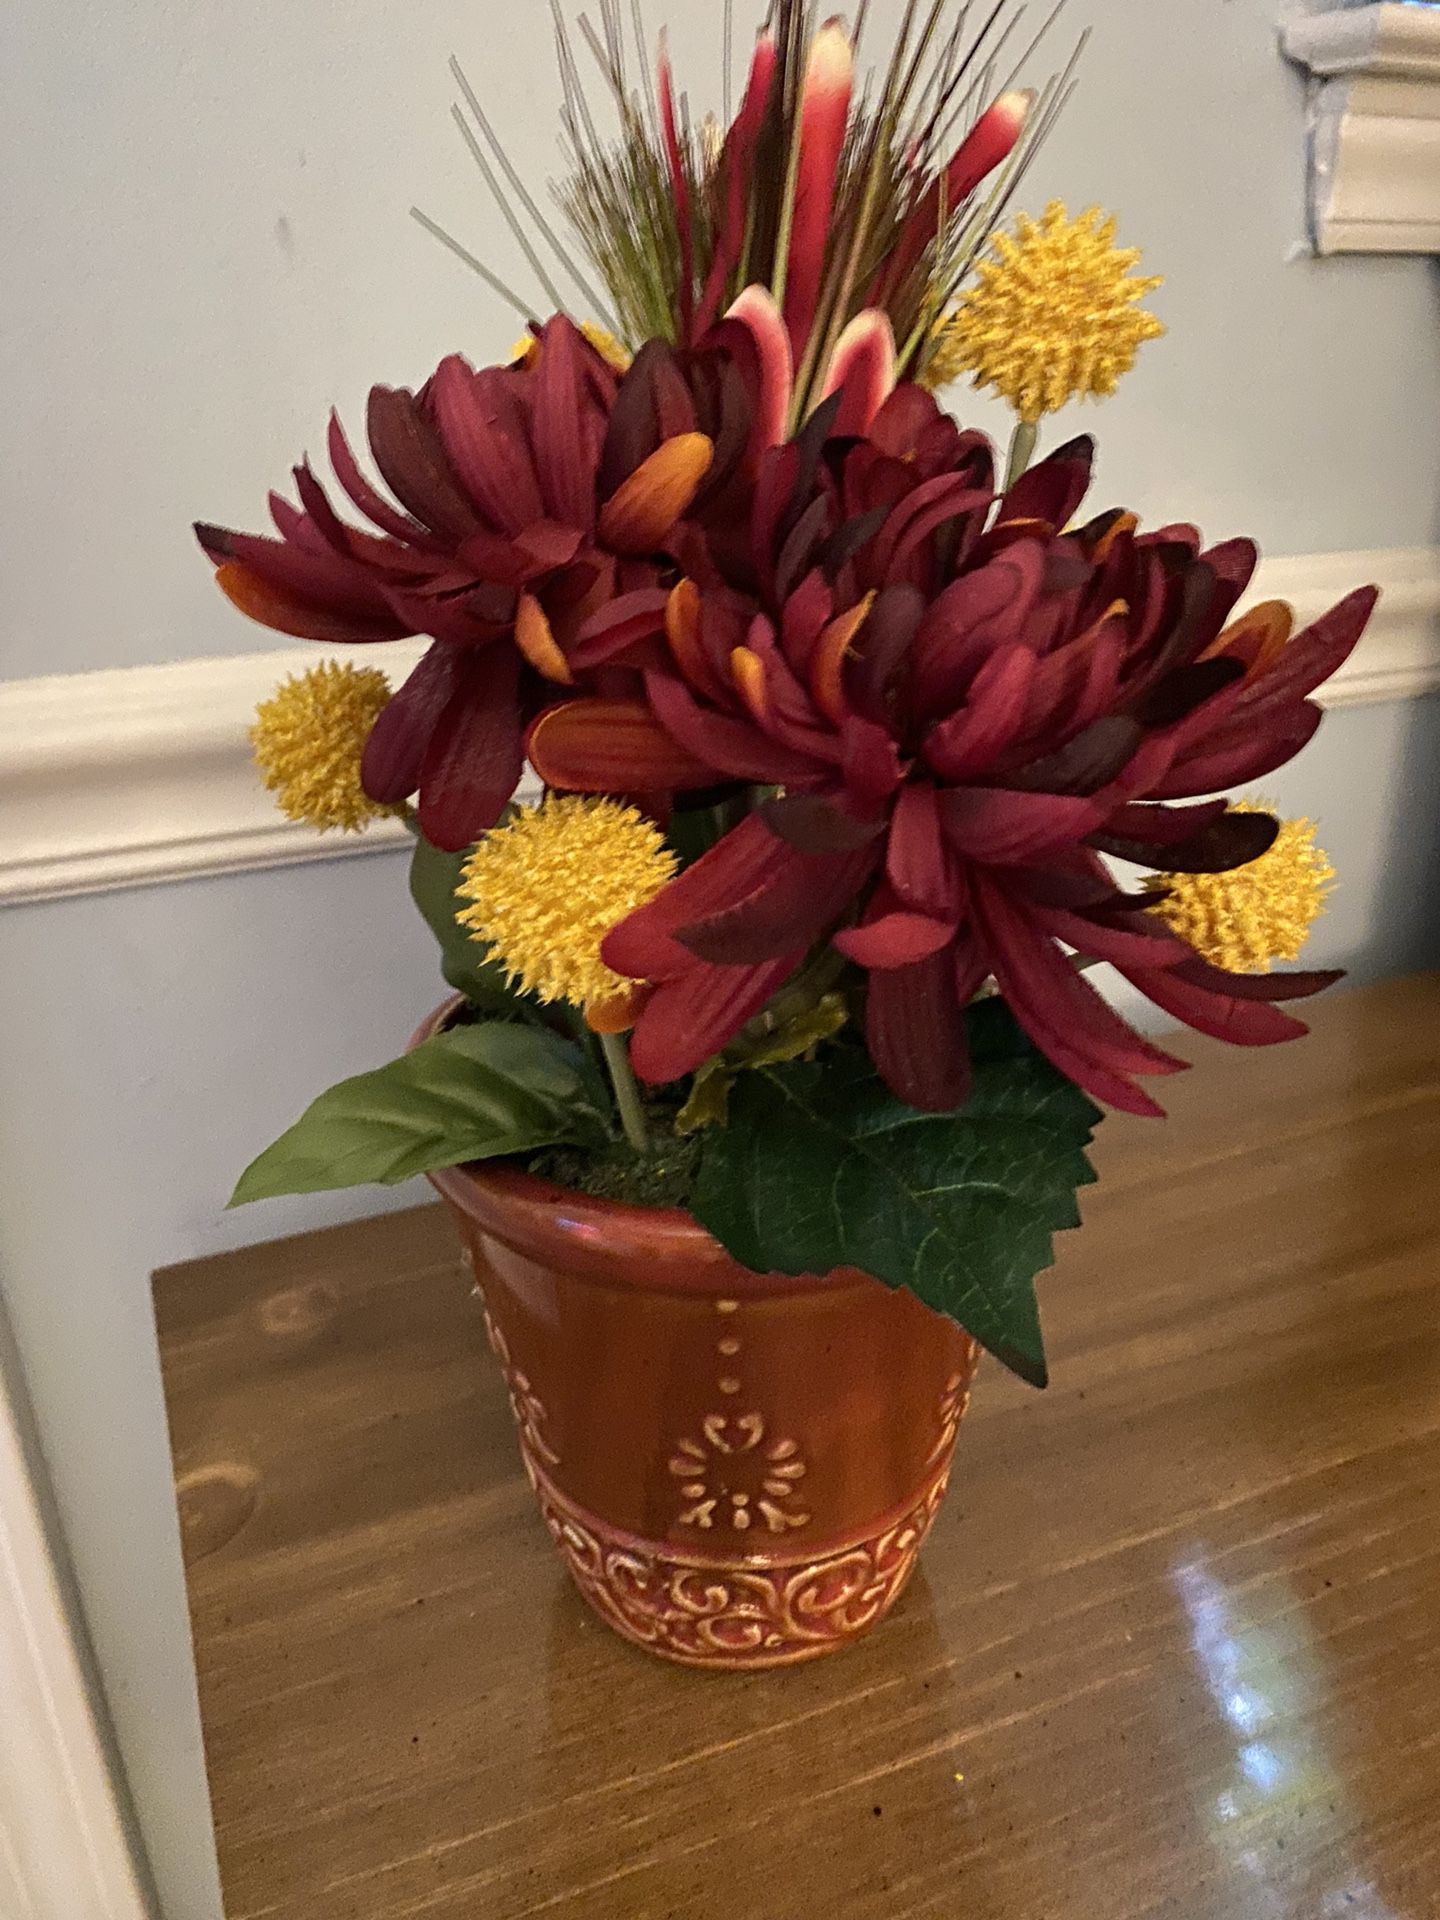 Ceramic Rust Color Vase With Maroon/ Yellow Flowers 